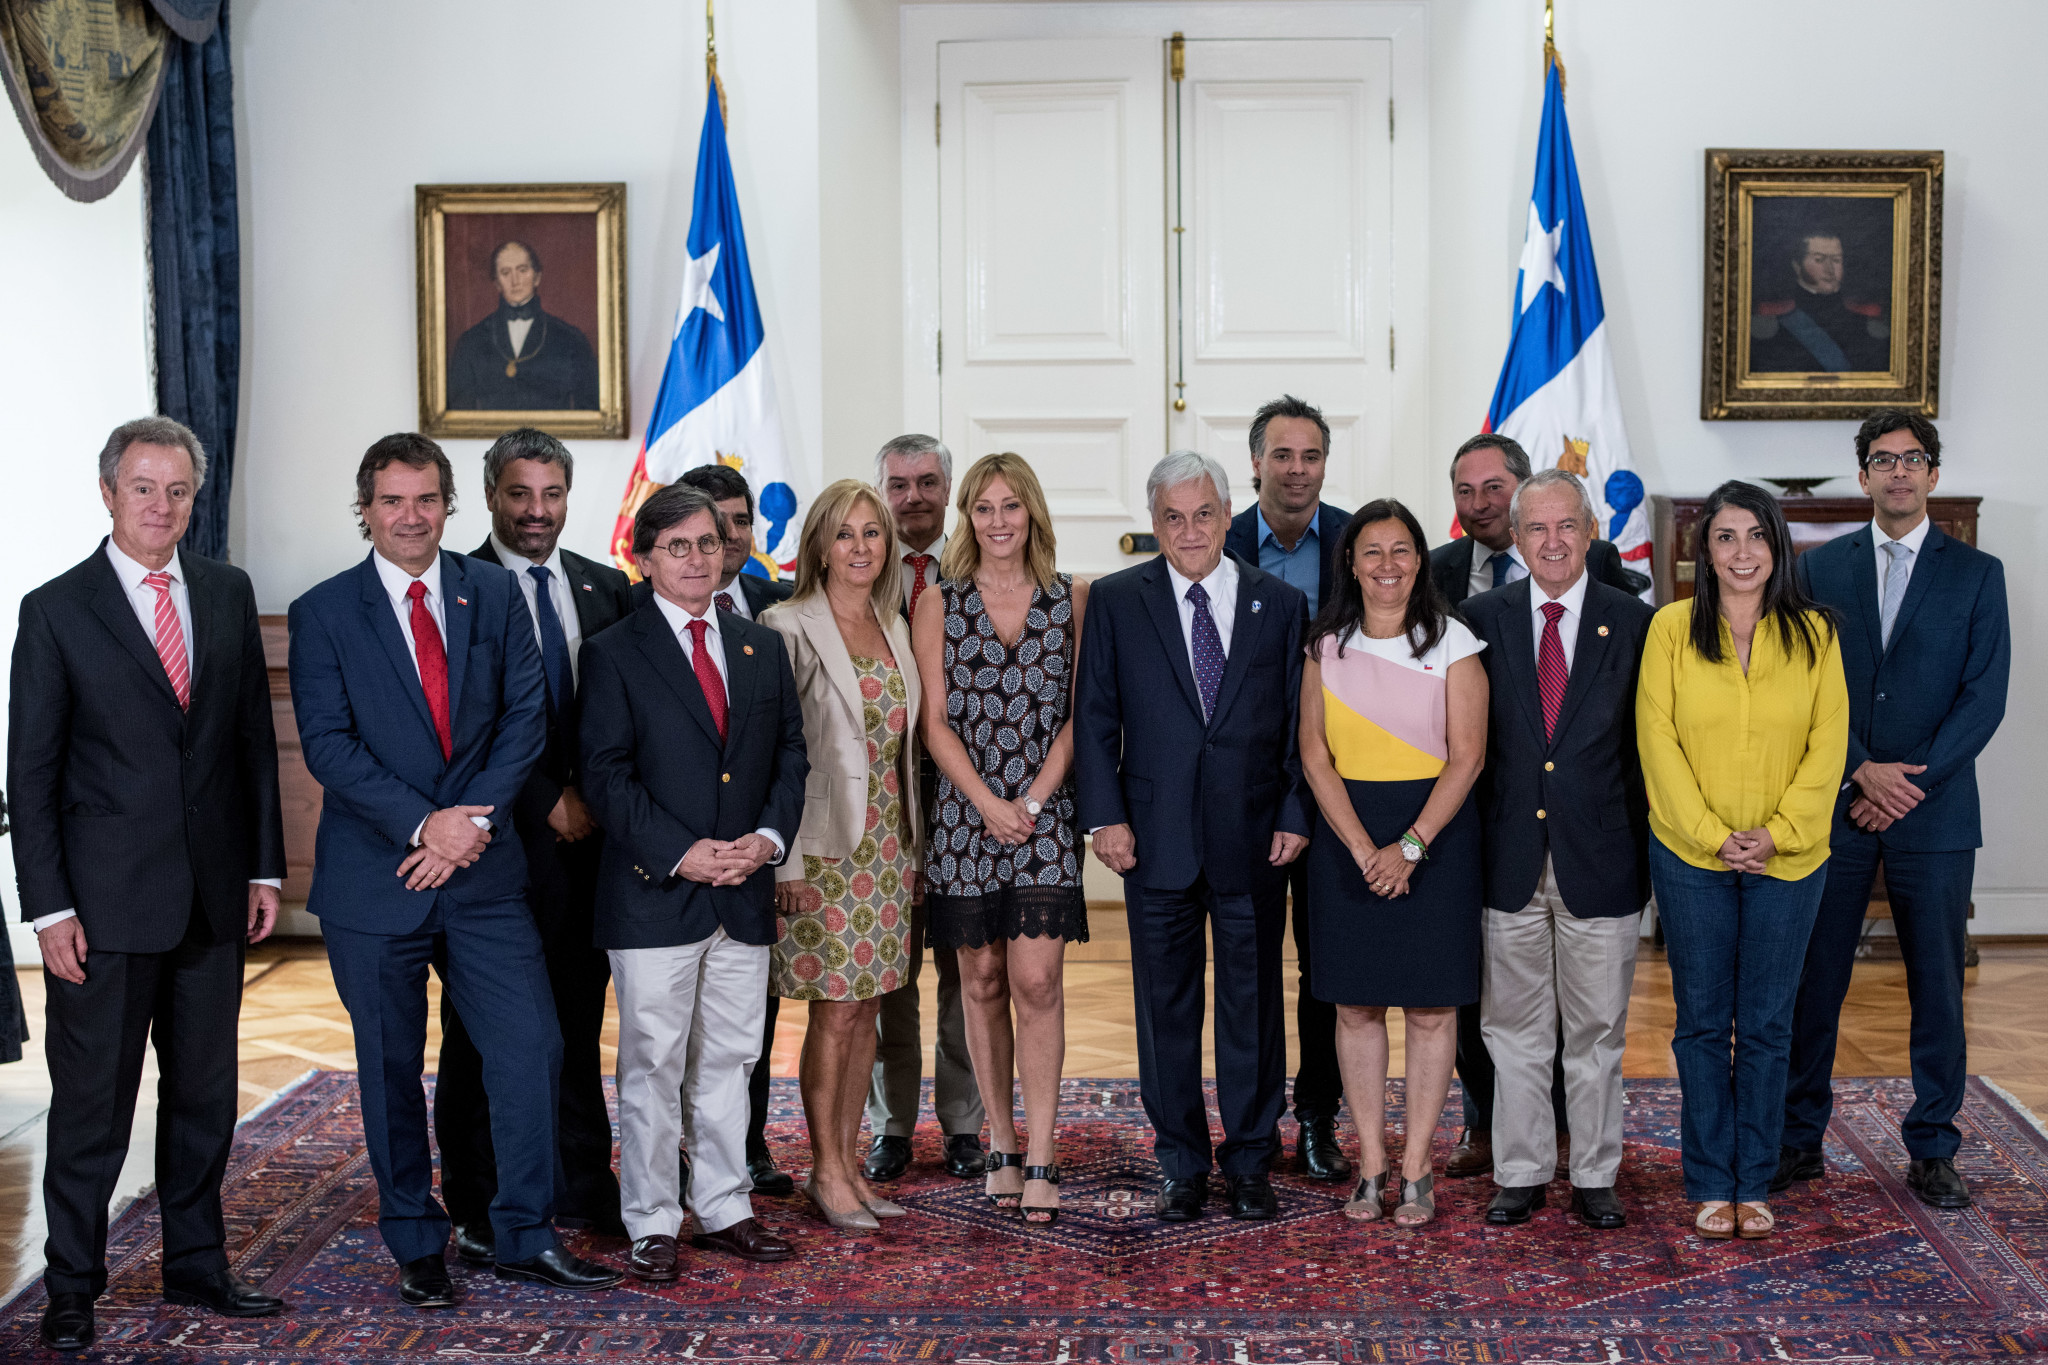 Santiago 2023 announce nine-strong Organising Committee